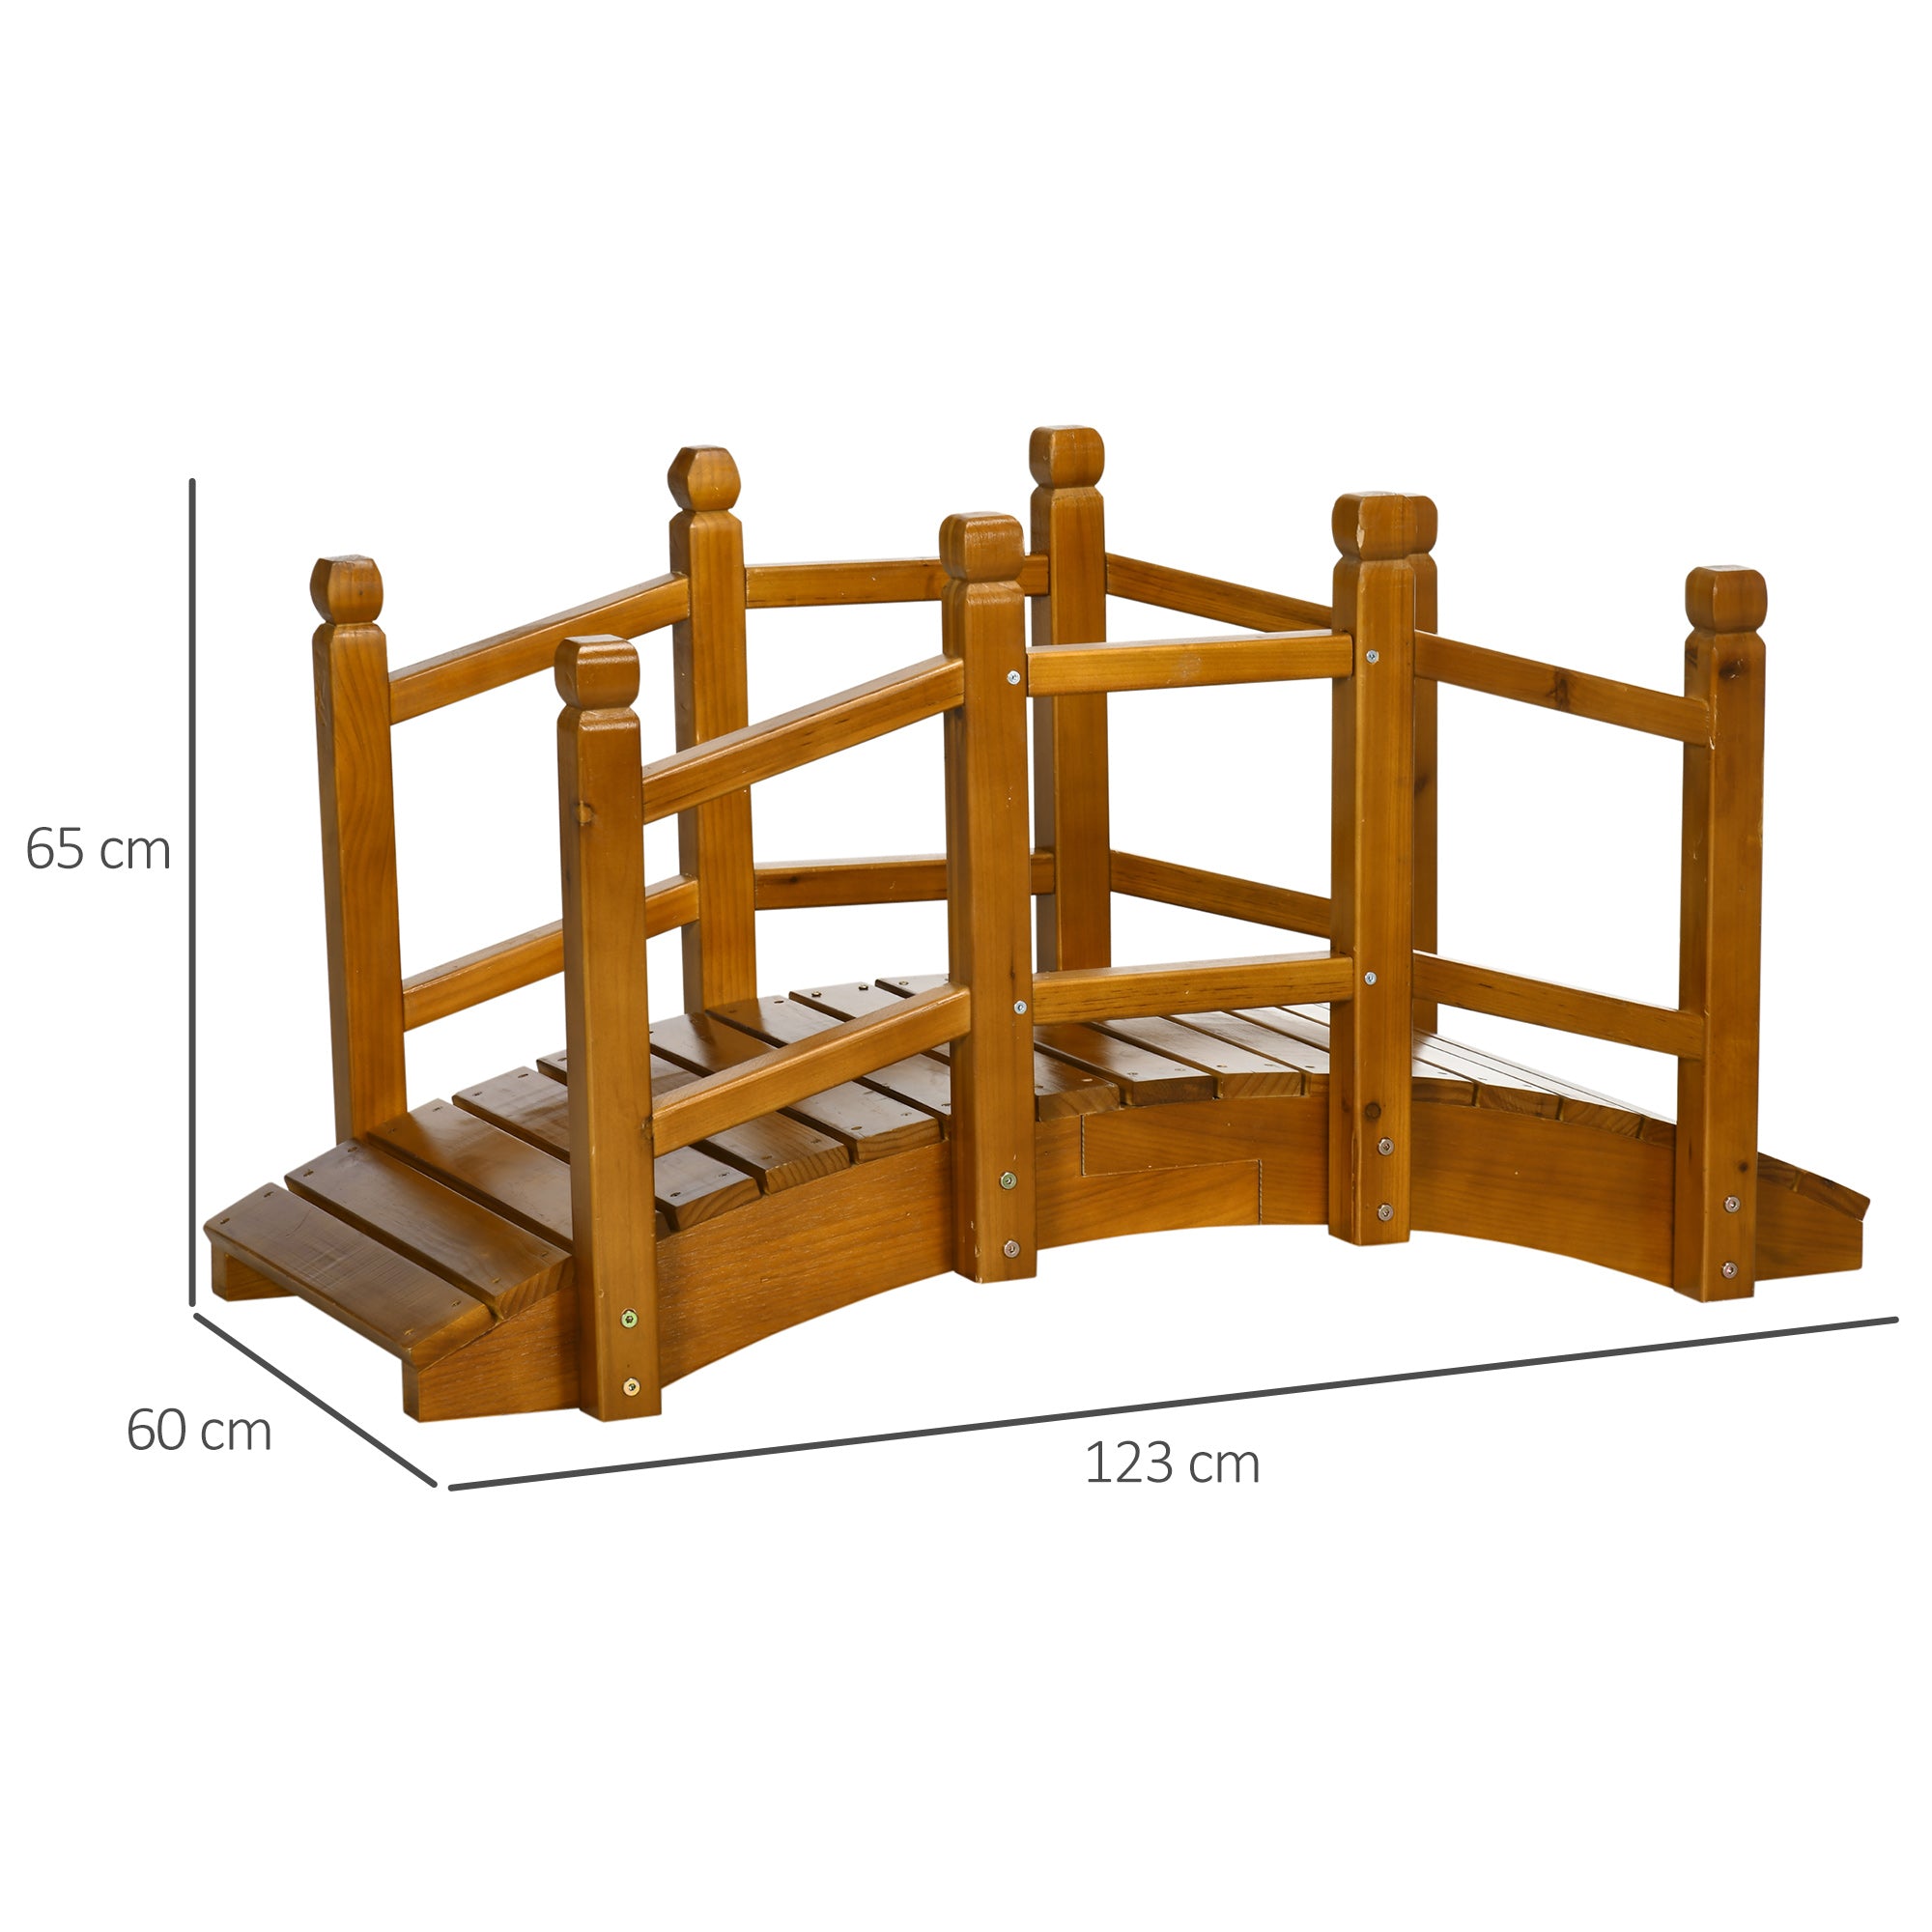 Outsunny Wooden Garden Bridge with Safety Railings, Arc Footbridge for Pond Backyard Stream, Brown